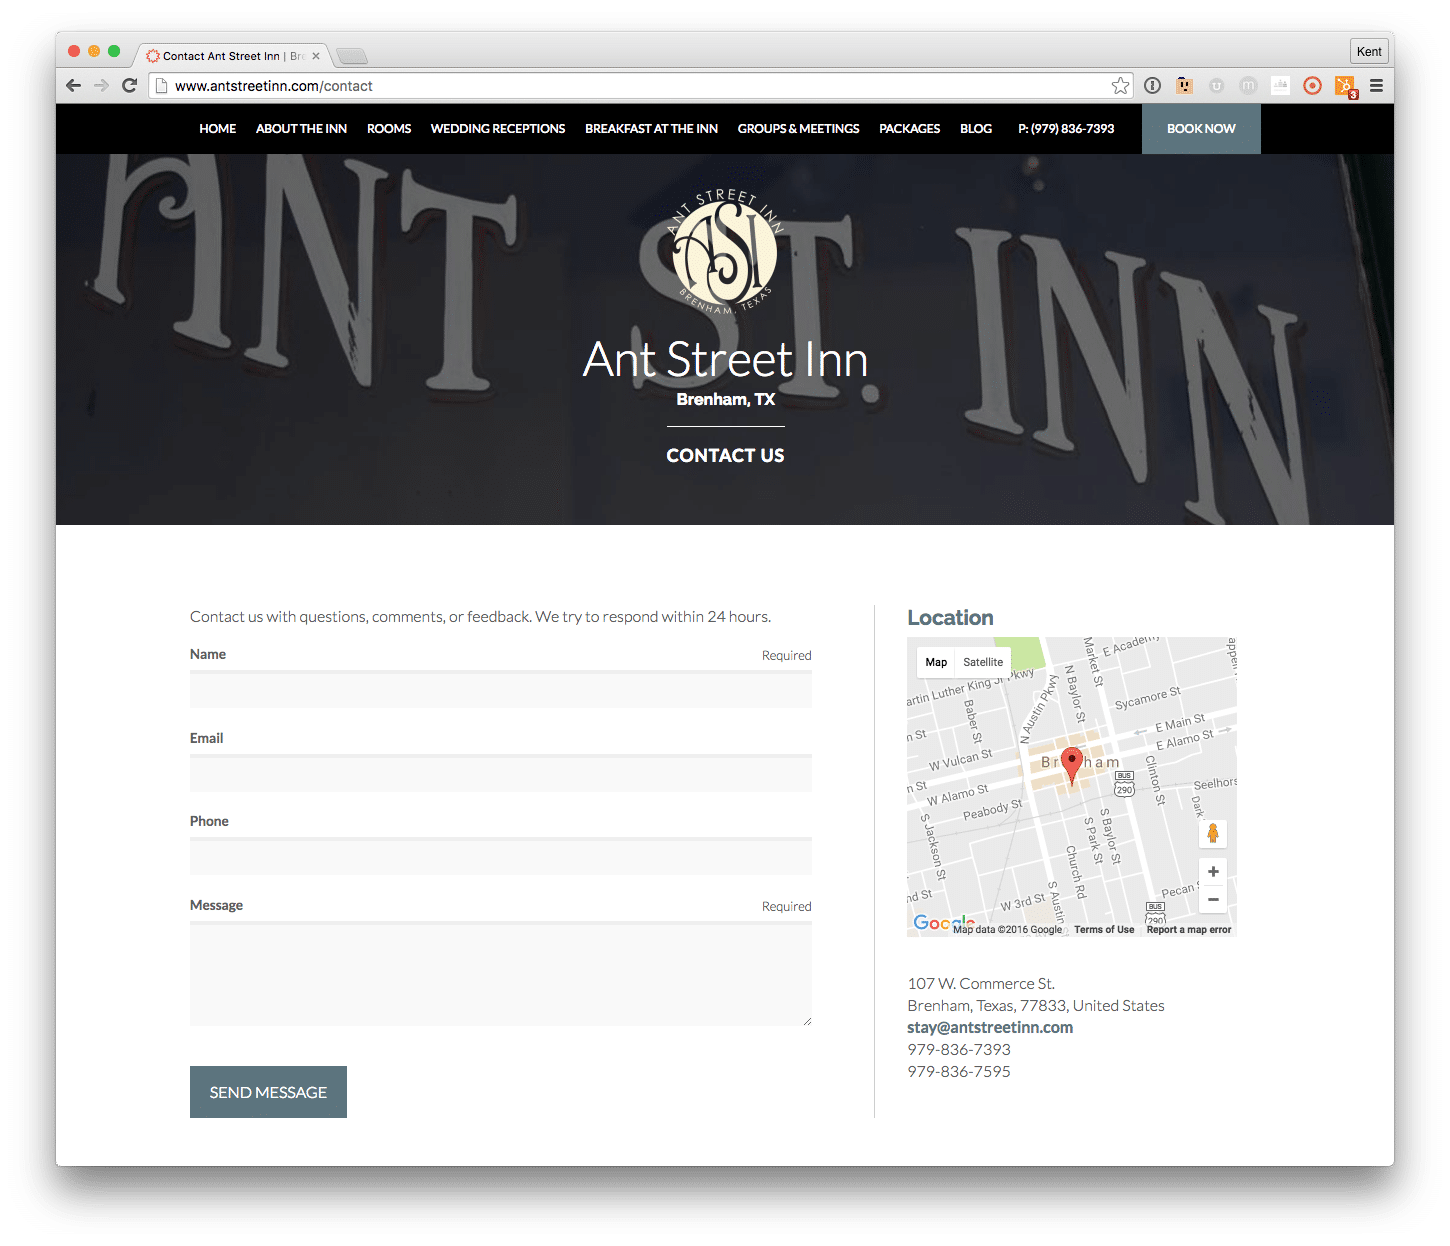 Ant Street Inn - good example of what a bed & breakfast website's contact page should look like